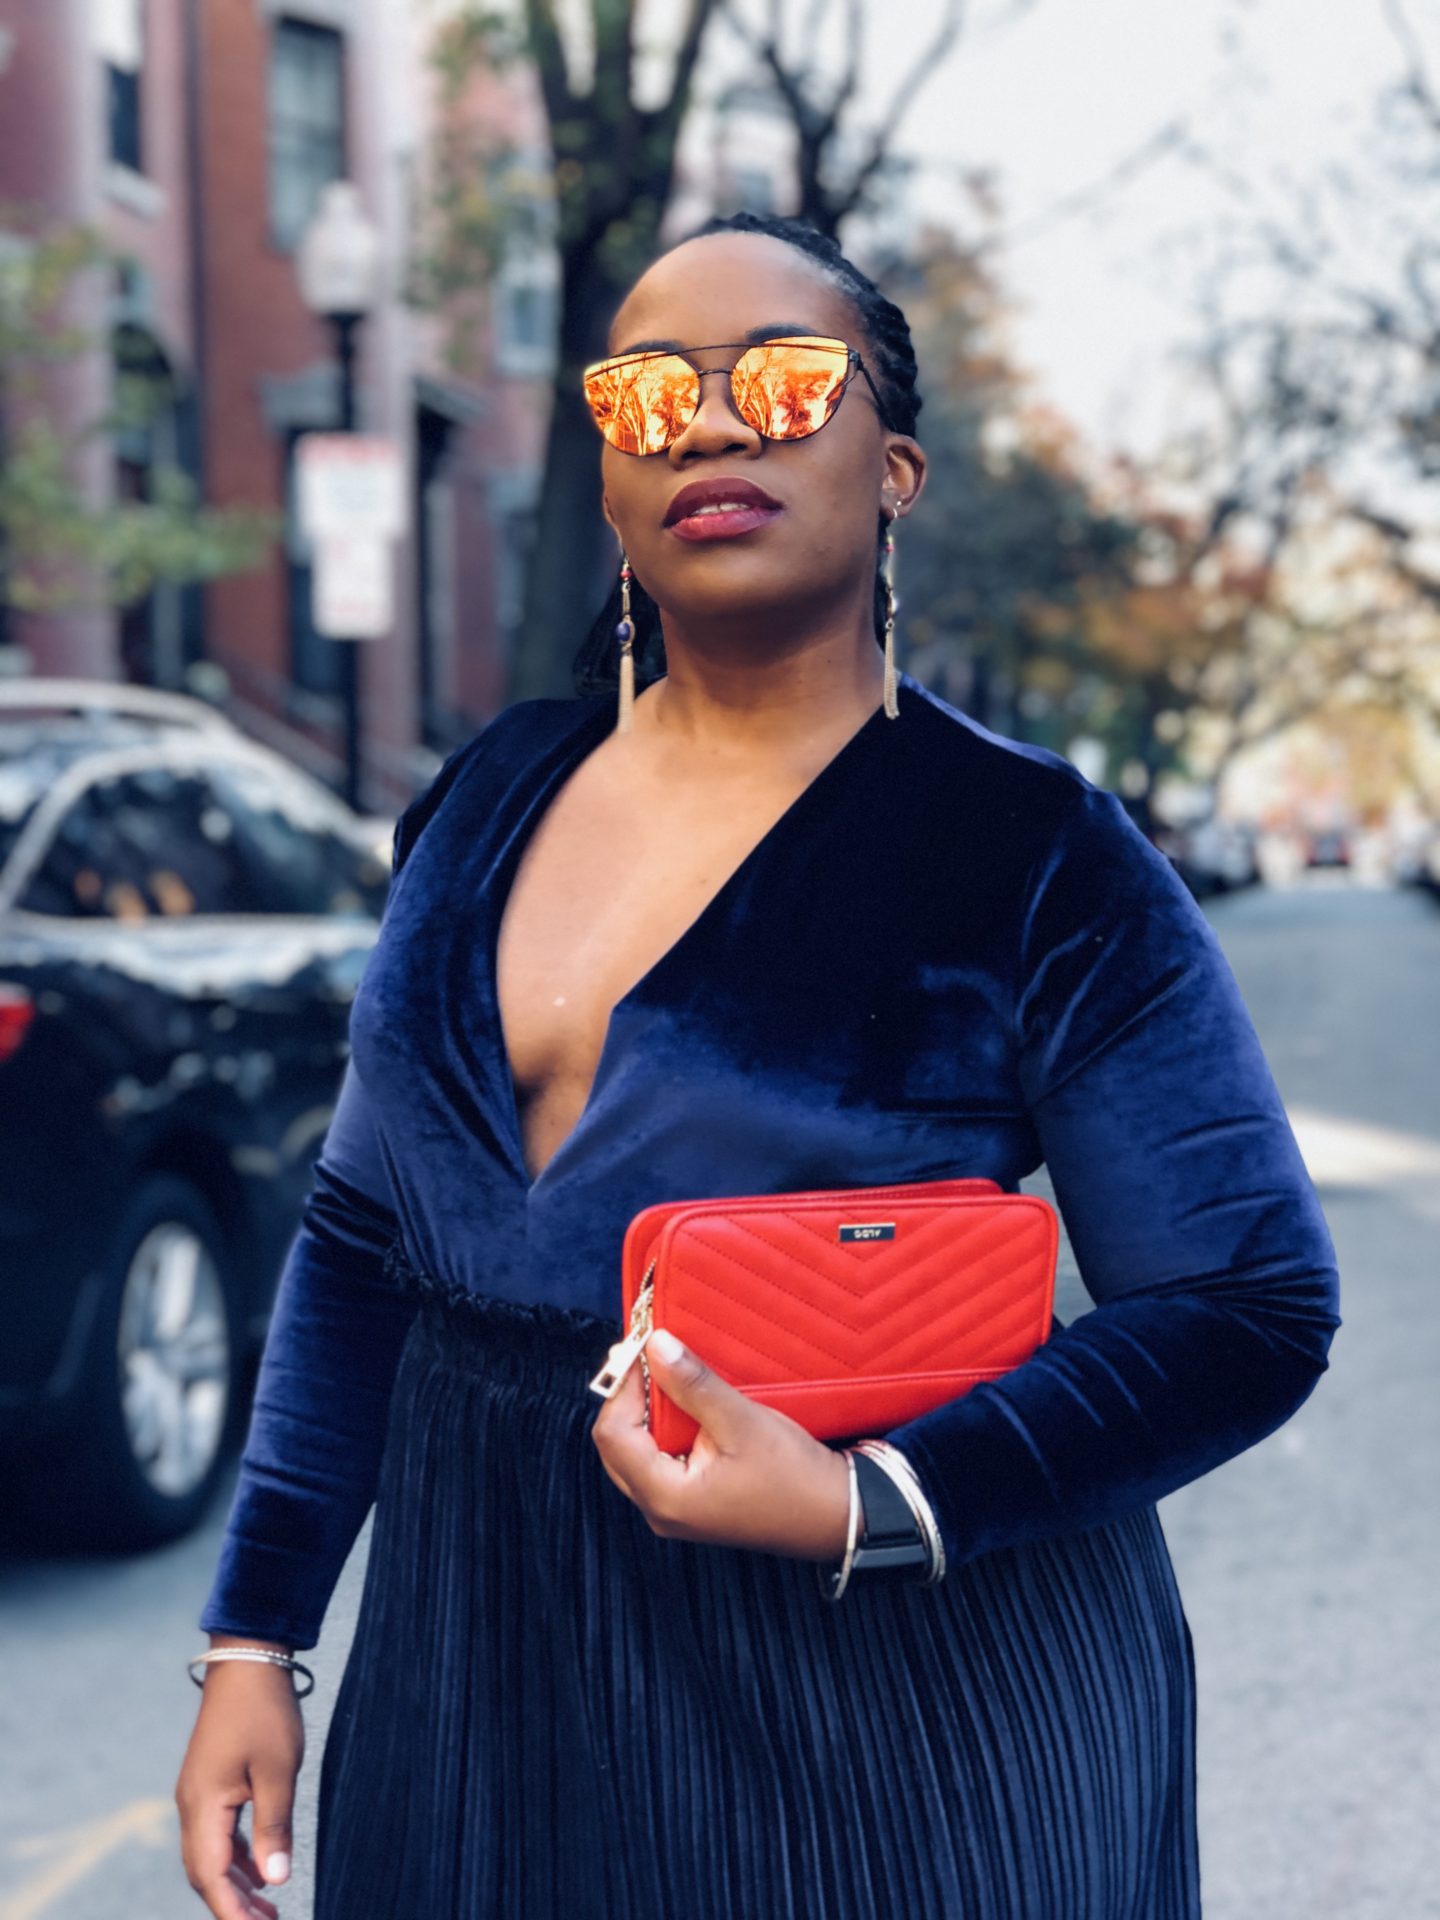 African blogger, Africancocktail, African cocktail, African, African woman, African Bloggers, Boston Blogger, New England Blogger, Charlotte Russe, Curvy Woman, Curvy Blogger, Curvy Girl, Primark, Make it your own, Velvet